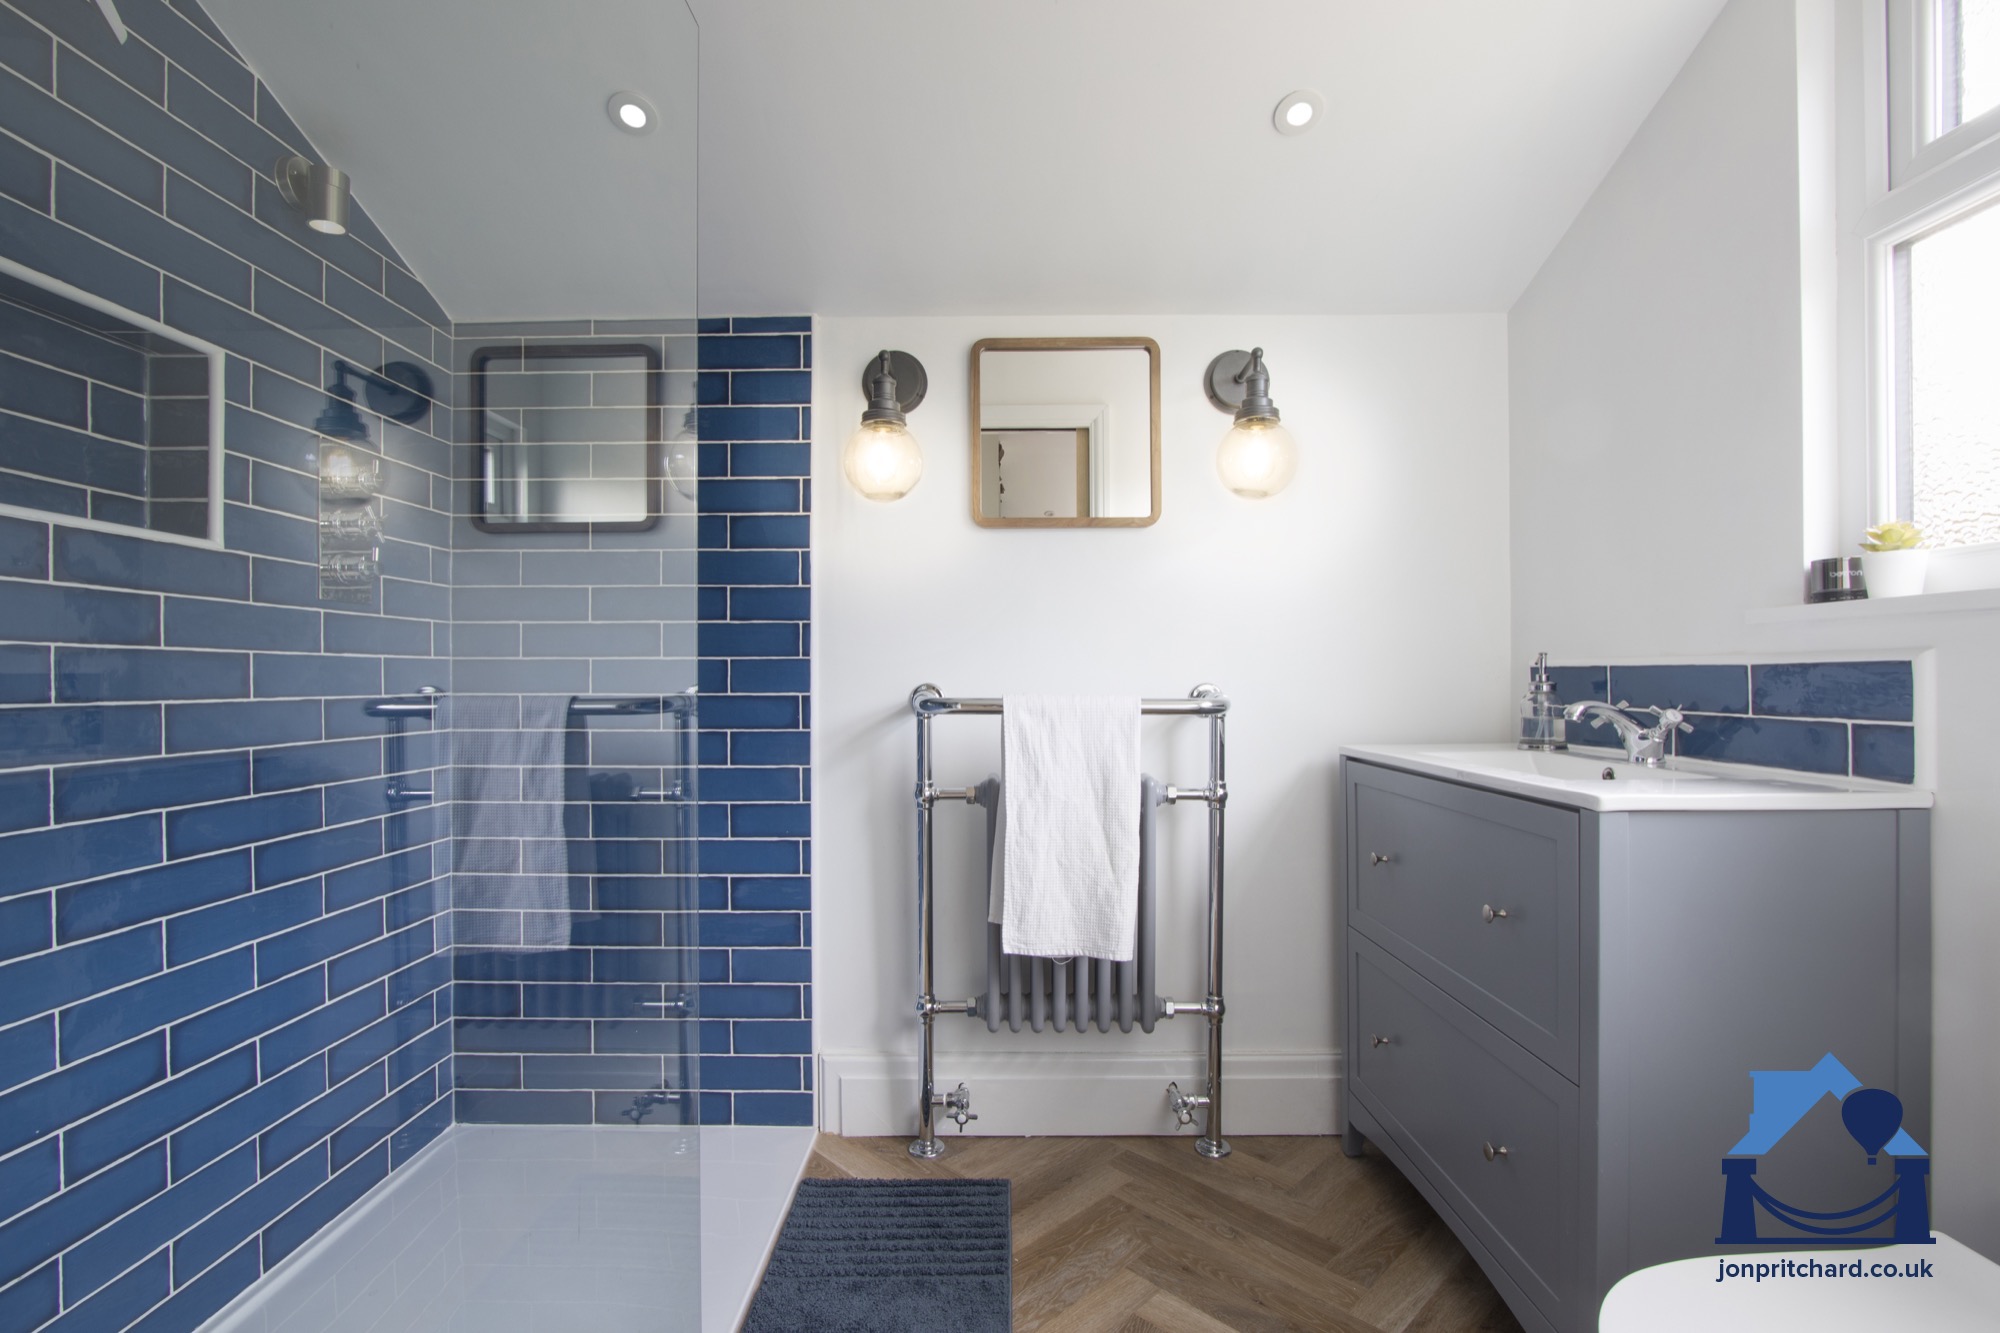 Chic, tidy loft conversion bathroom by Jon Pritchard, Bristol, UK featuring double-width walk-in shower, classic navy blue brick tiling and white walls with a parquet floor.